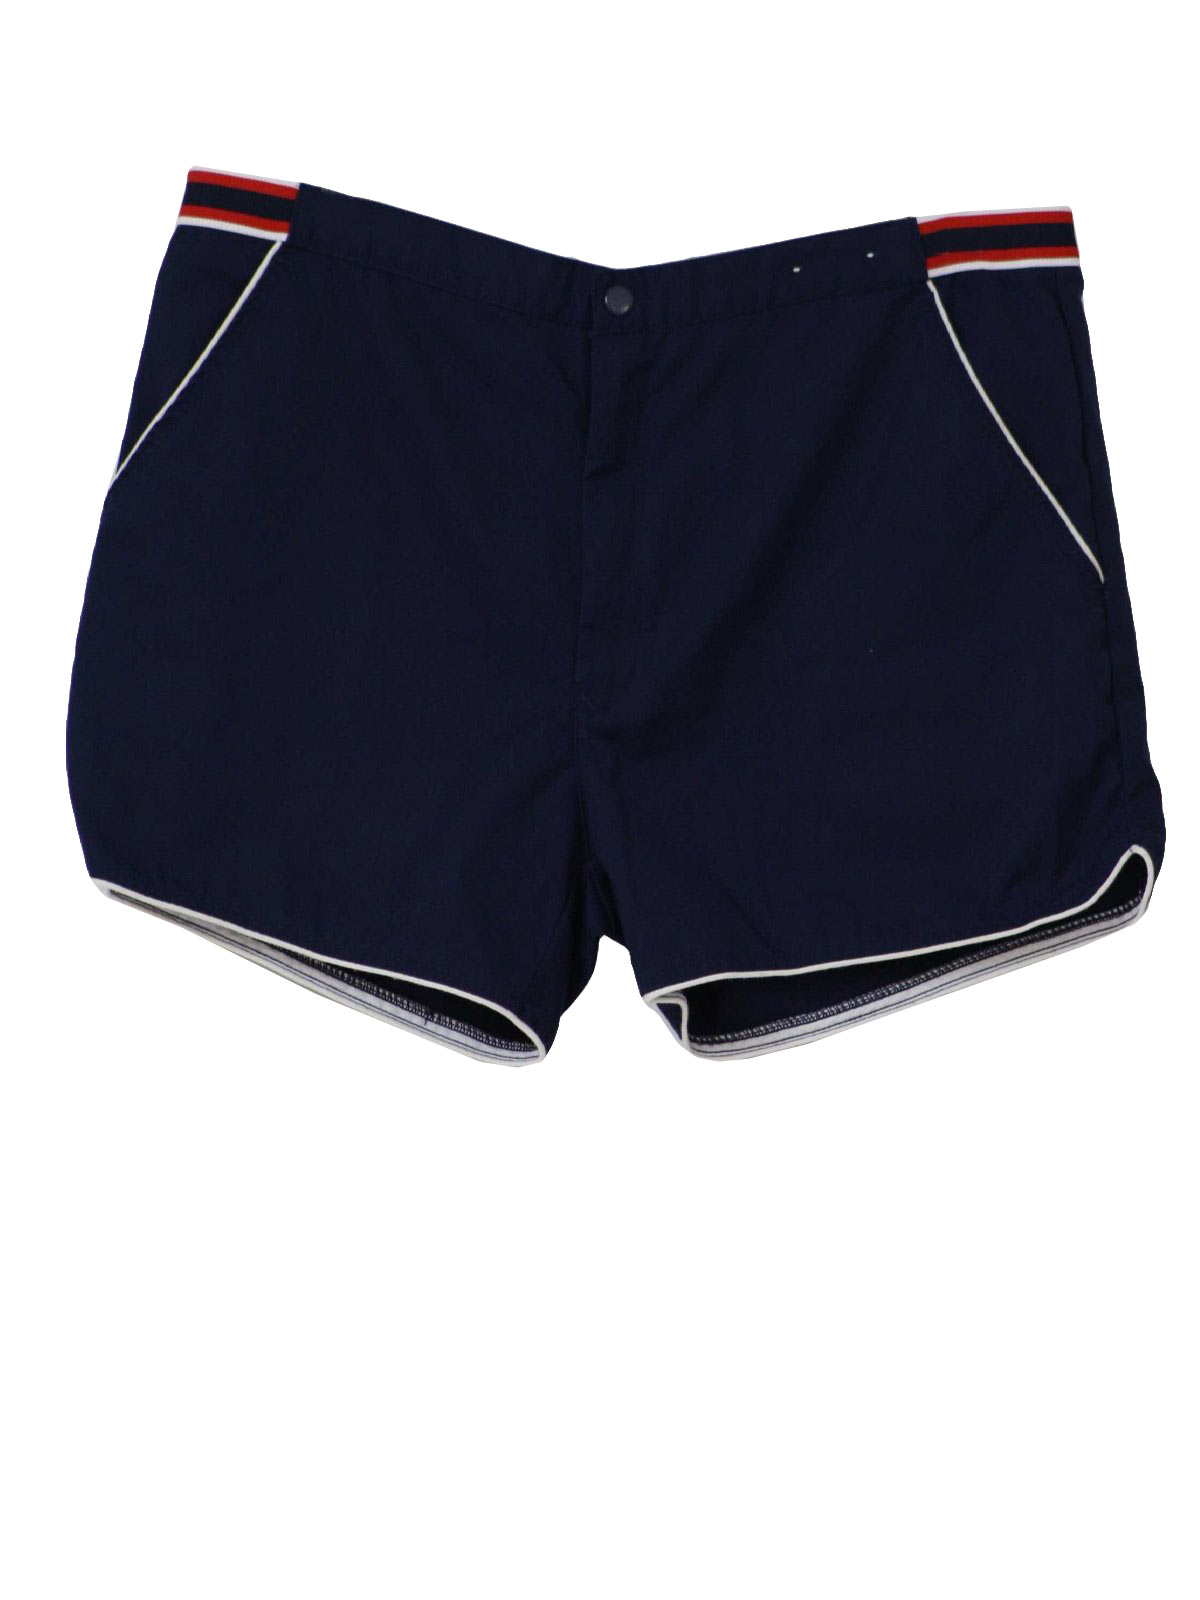 Eighties Travis Cup Shorts: 80s -Travis Cup- Mens navy blue polyester ...